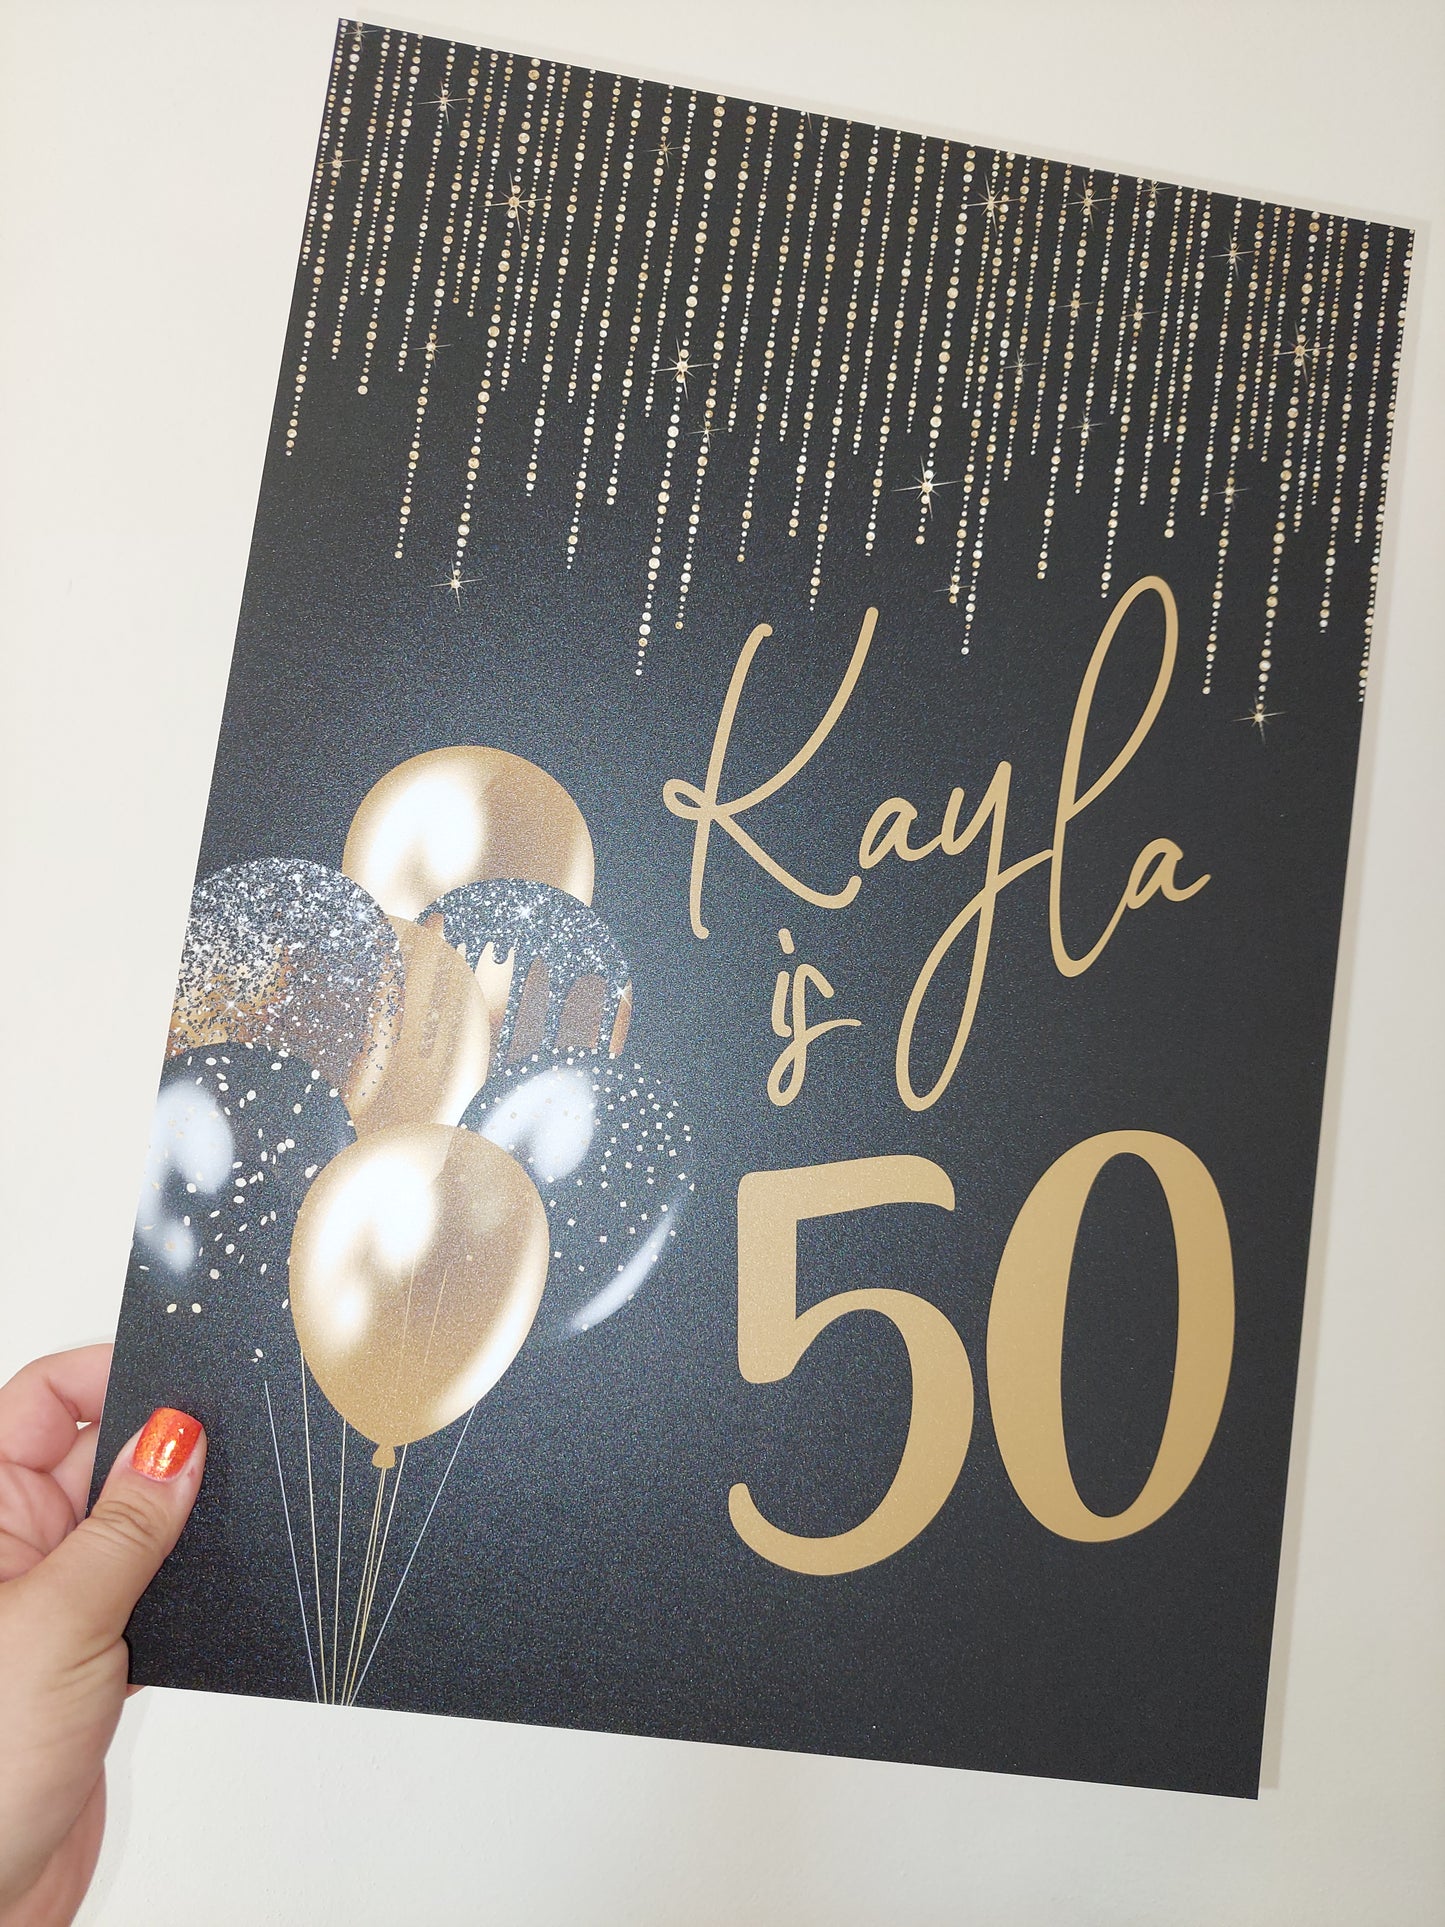 Black & Gold Welcome Board Sign | Personalised Birthday Board | Birthday Party Sign | A4, A3, A2